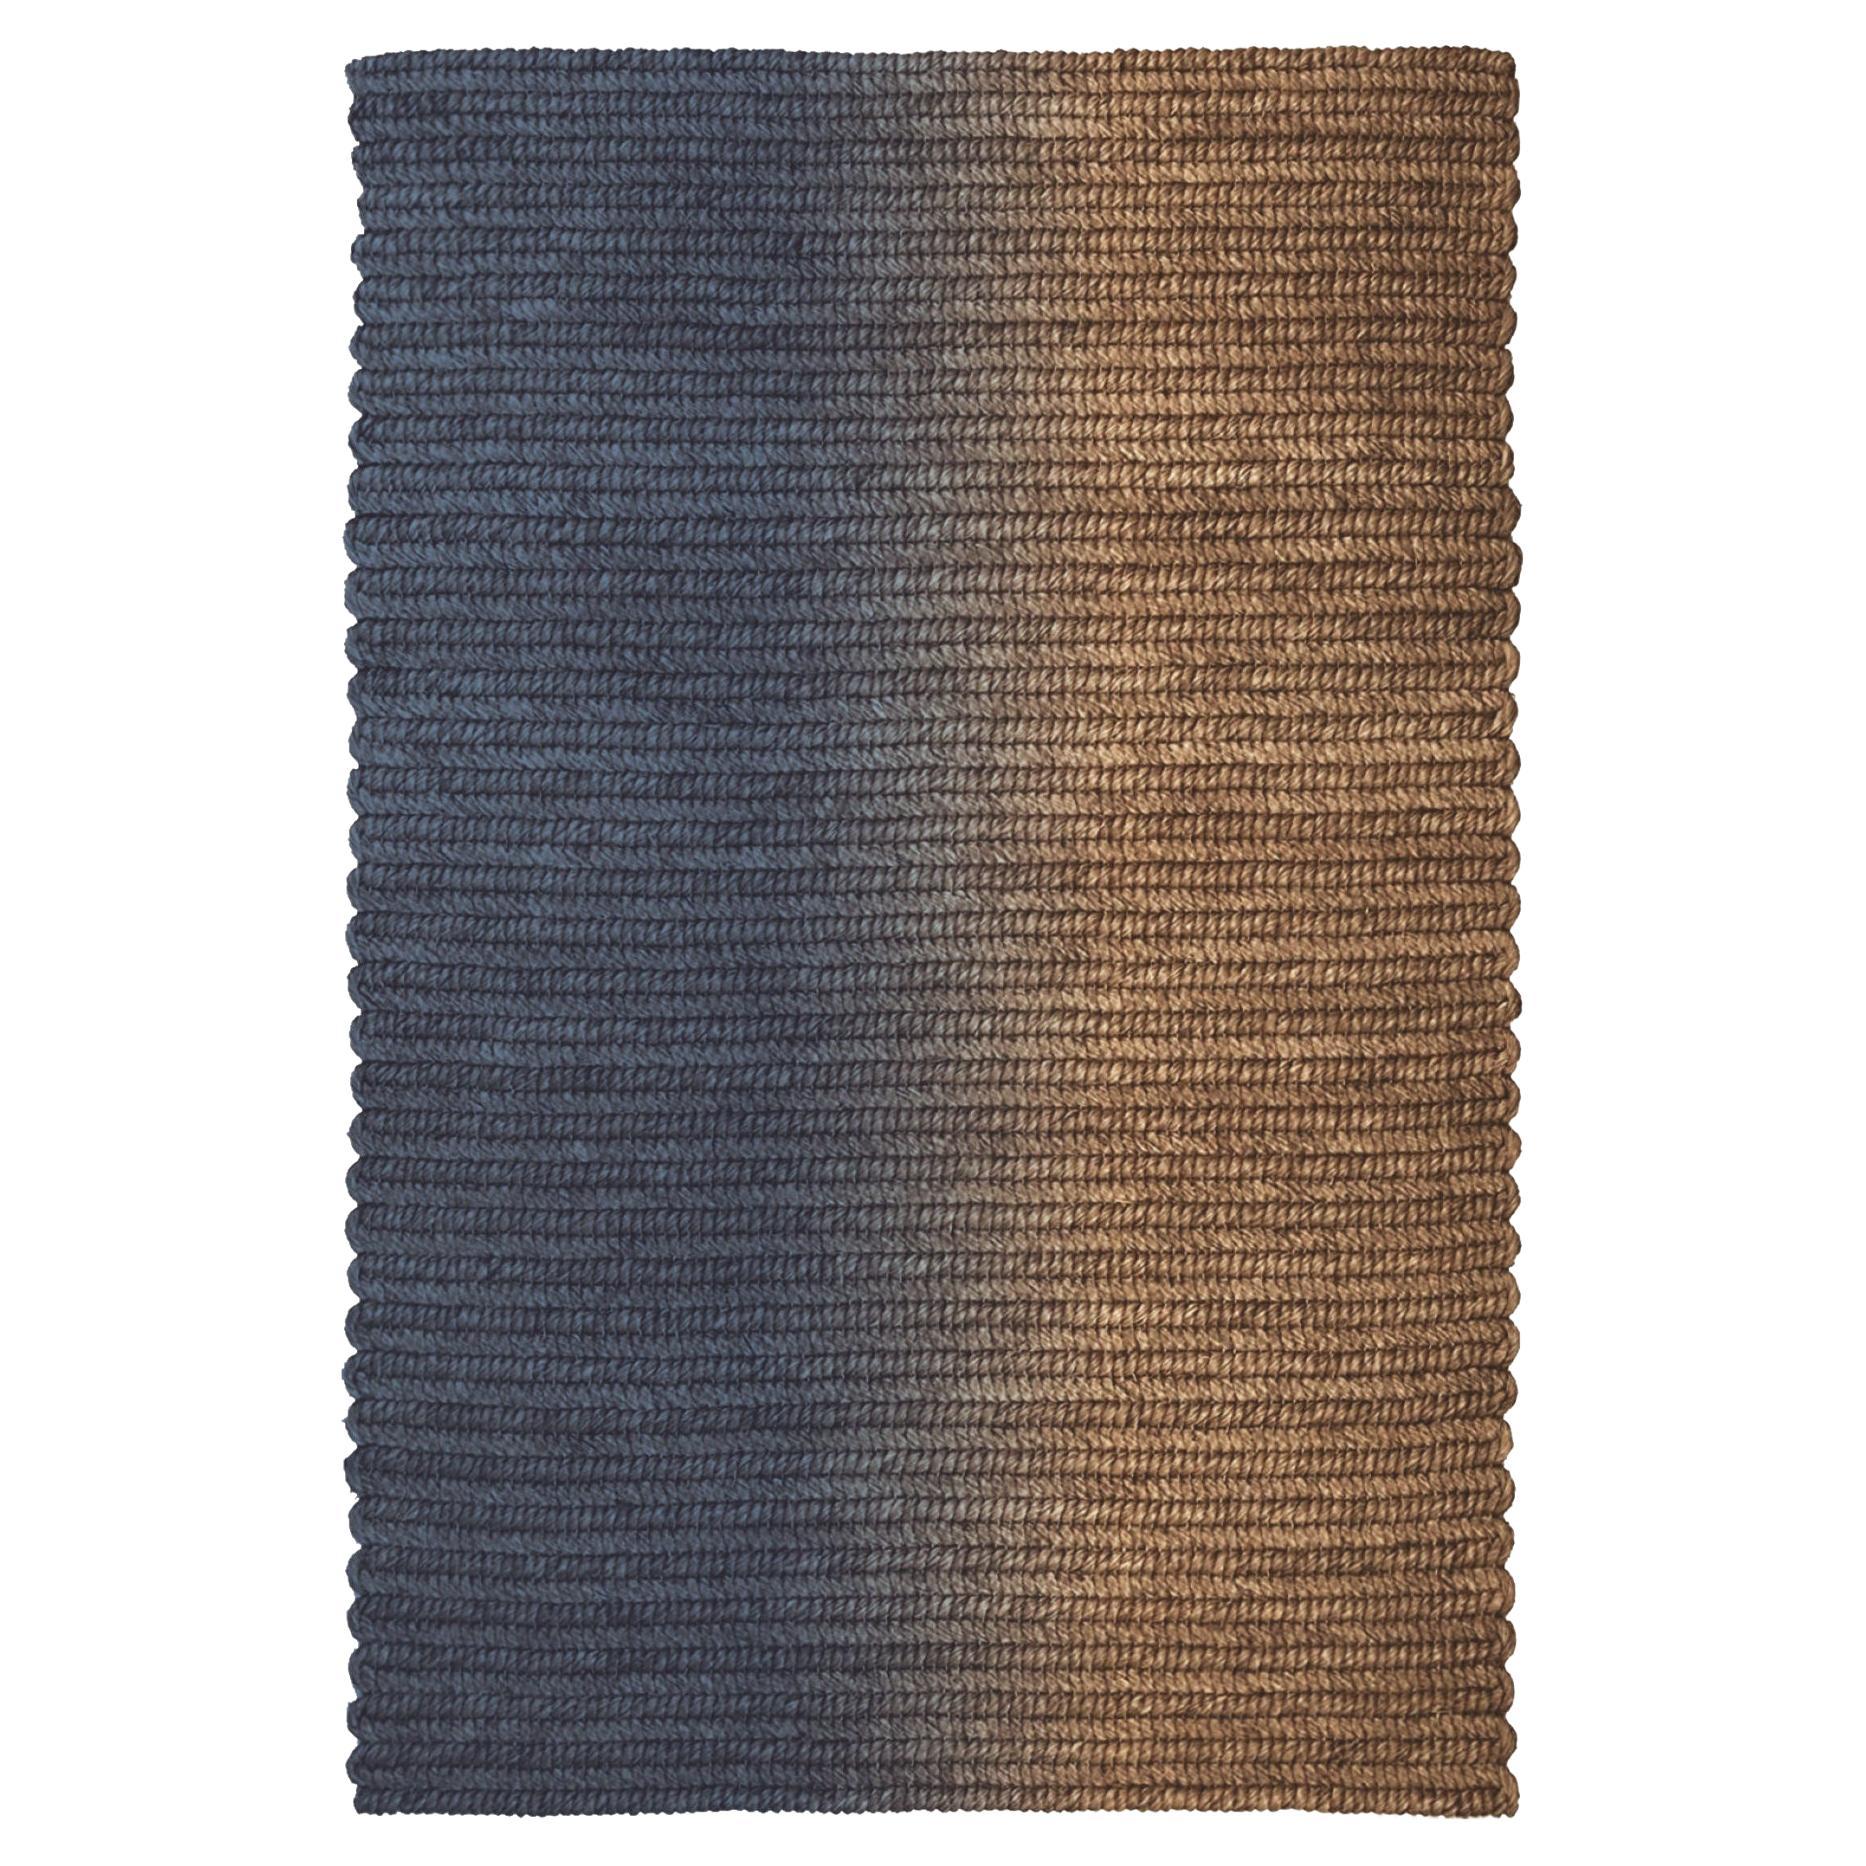 'Switch' Rug in Abaca, 'Royal Blue' by Claire Vos for Musett Design For Sale